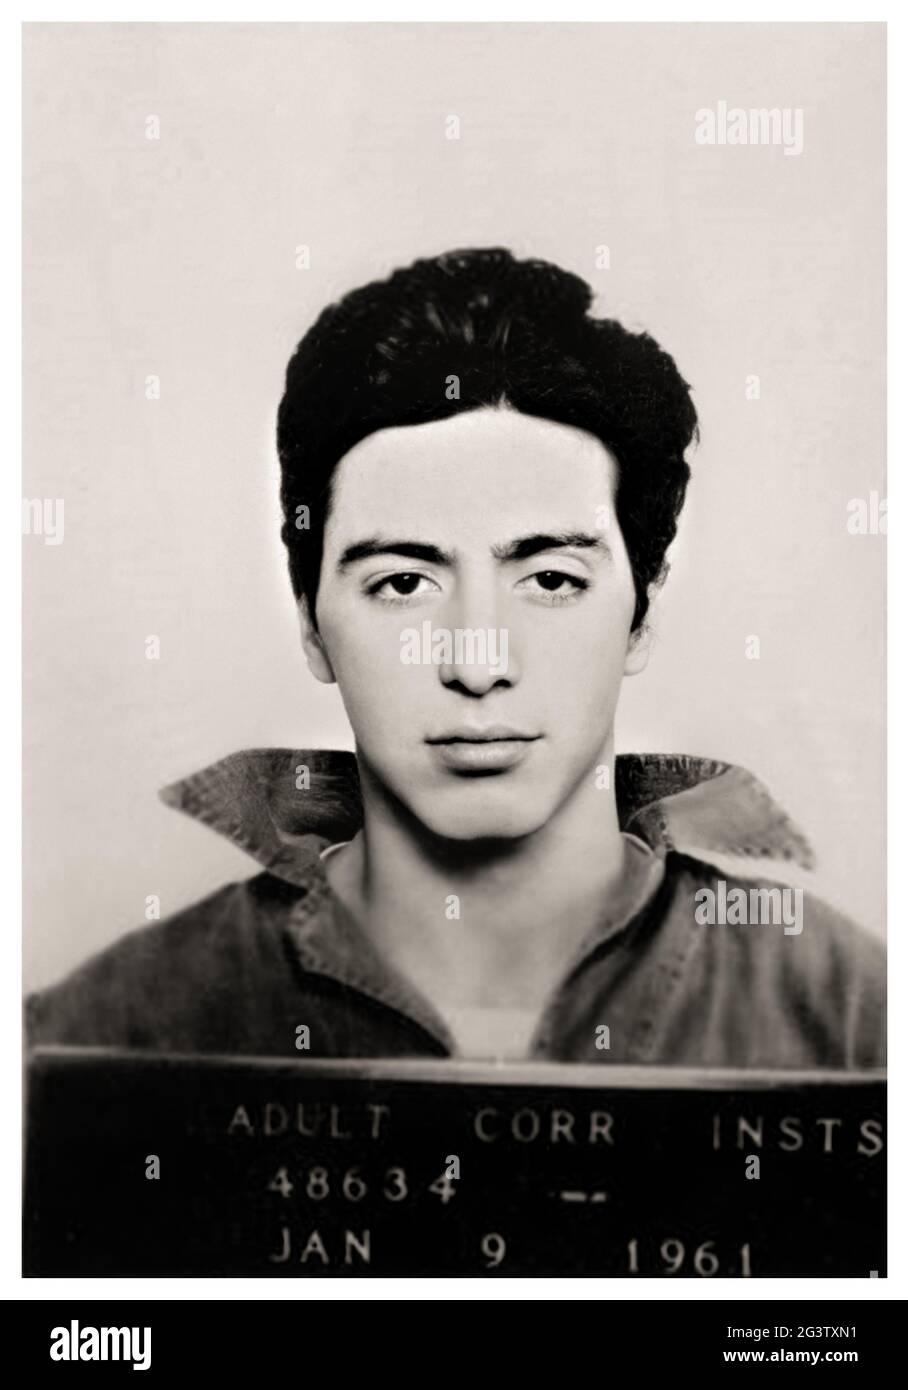 1961, 9 january , Woonsocket, Rhode Island , USA : The celebrated movie actor AL PACINO ( Alphonse , born in 1940 ) when was a teenager boy aged 20 arrested by Police Department on suspicion of Attempted Robbery in the official mug-shot . Pacino reportedly spent three days in jail . Unknown photographer of Police Department of Woonsocket , Rhode Island. - HISTORY - FOTO STORICHE - personalità da giovani giovane - personality personalities when was young - gioventù - giovinezza - ATTORE - MOVIE - CINEMA - TEATRO - THEATRE - ARRESTO - Arrestation - ARRESTATO DALLA POLIZIA - FOTO SEGNALETICA - mu Stock Photo